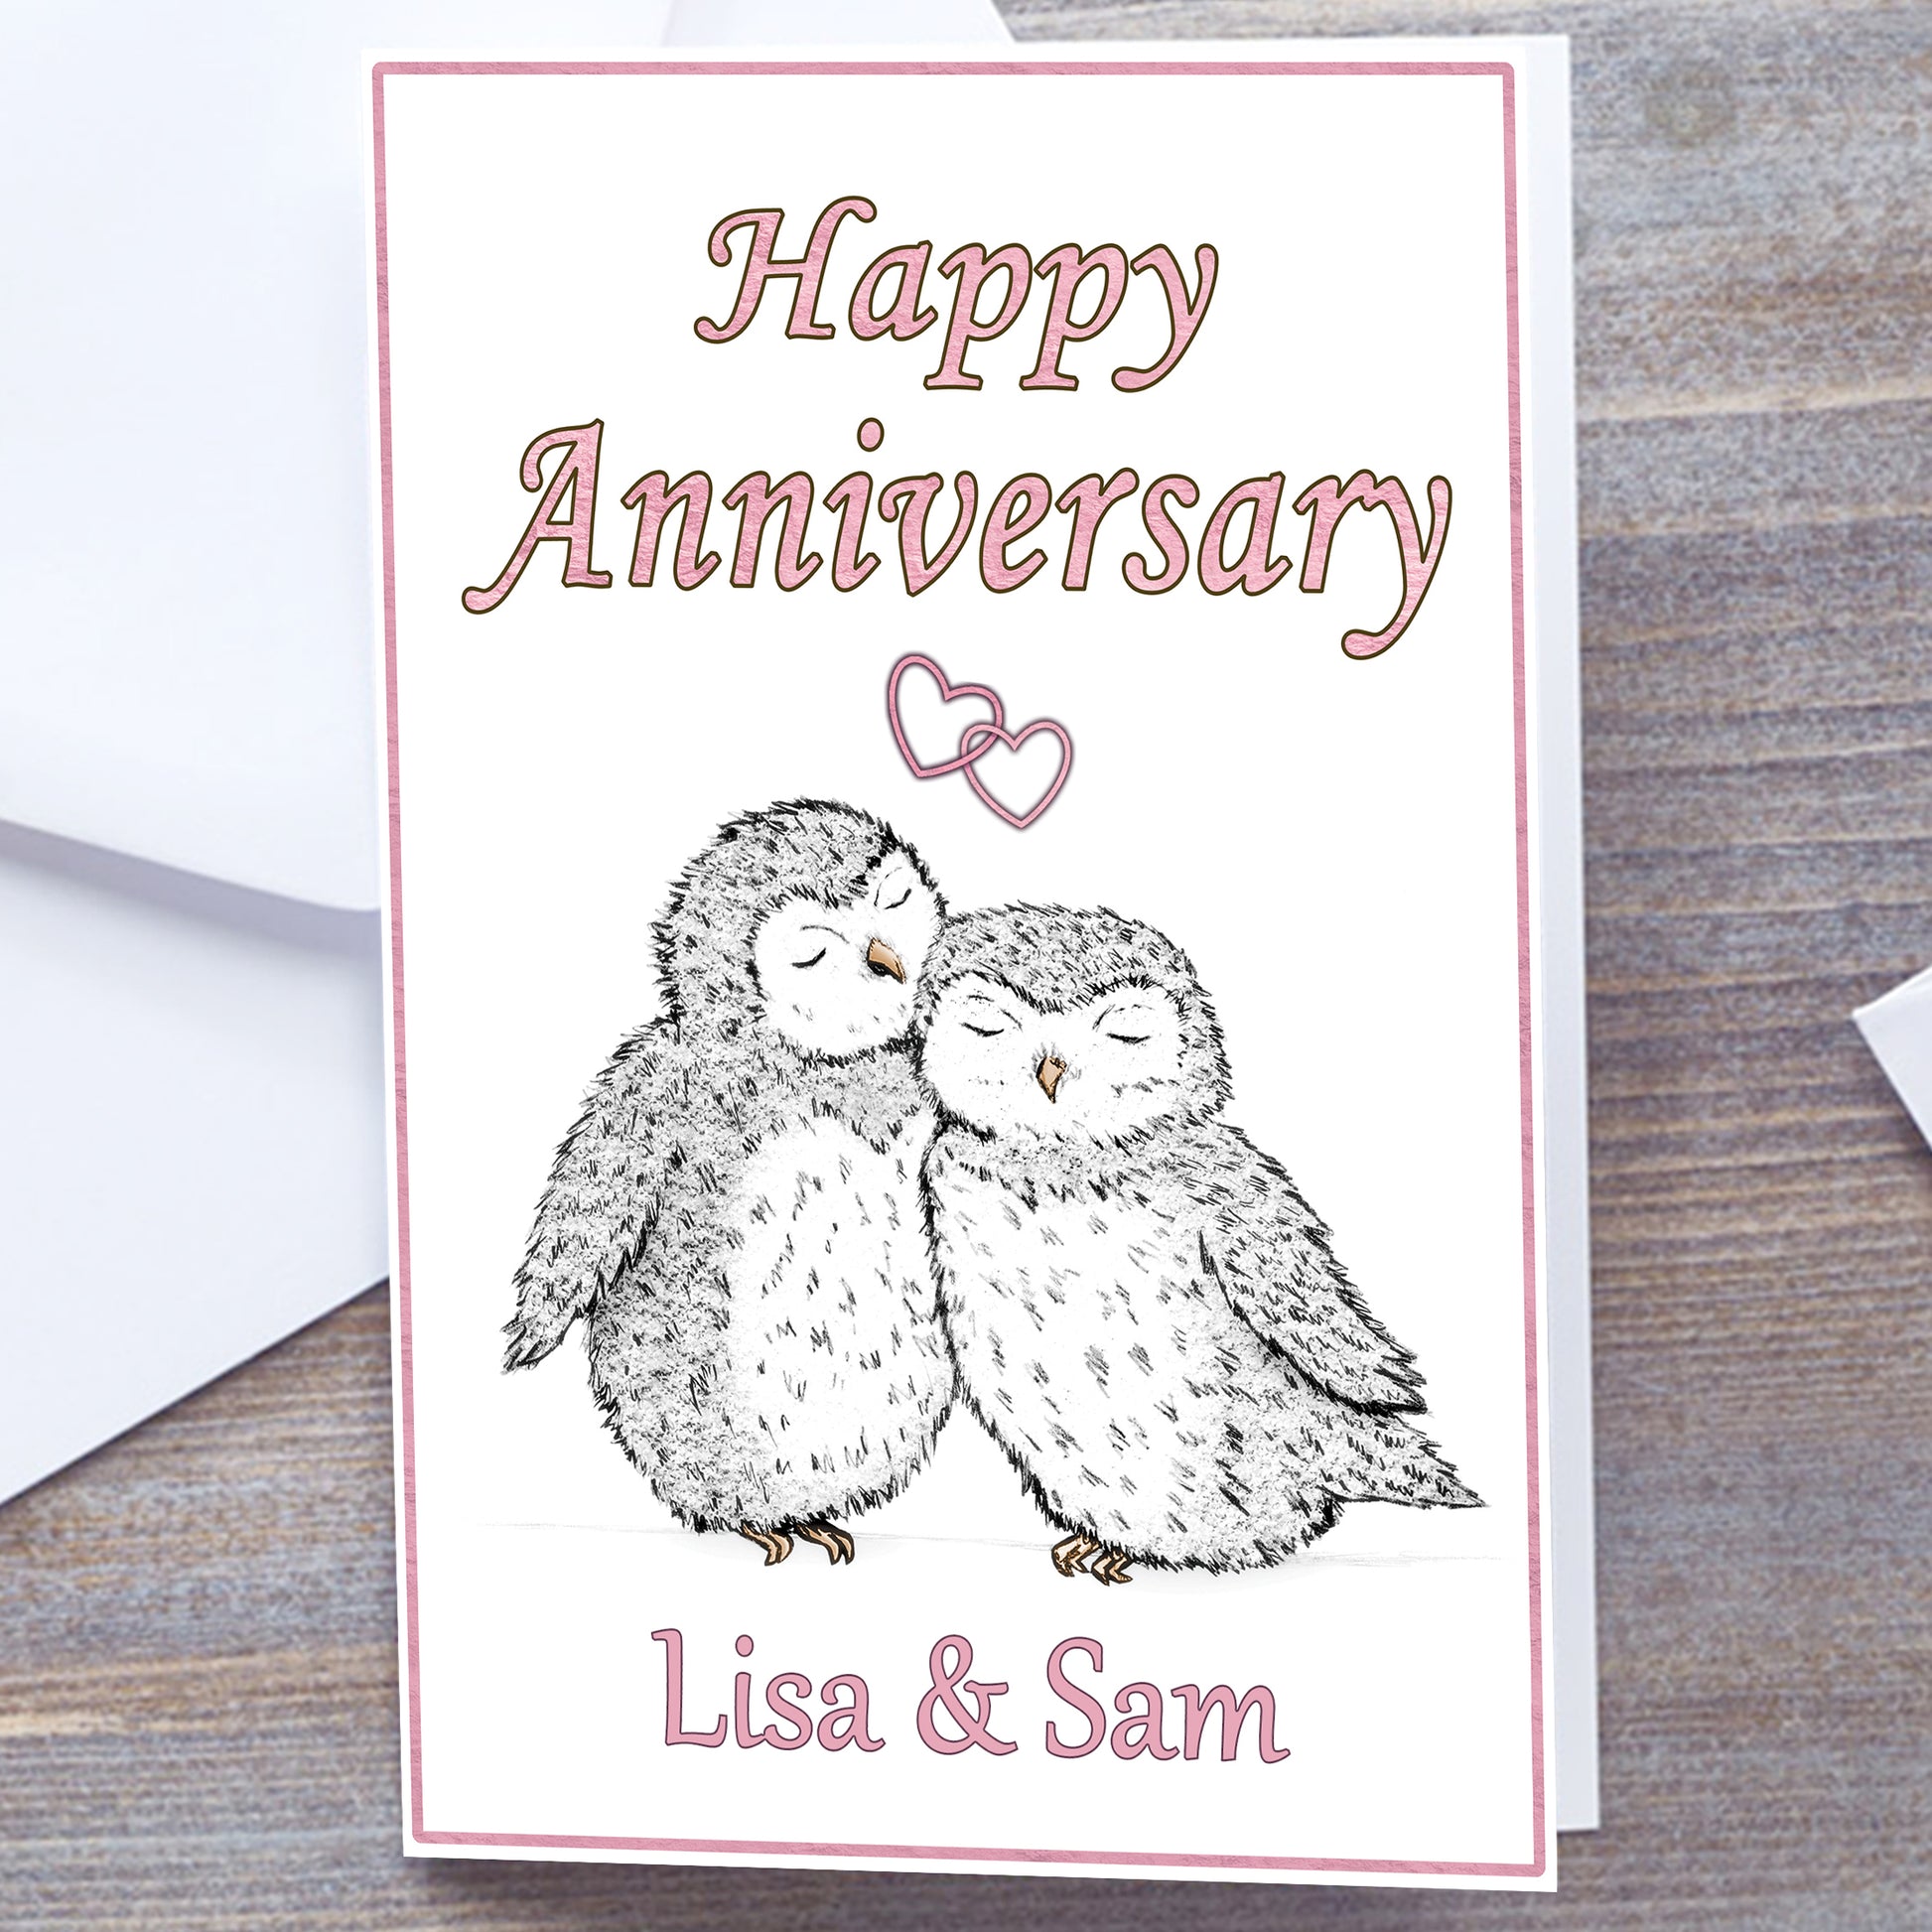 White card with pink border. Gloss A5 Happy Anniversary Greeting Card. Owl and heart design. Two black and white hand-drawn fluffy owls with pale yellow beaks and feet snuggling under interlocking pink hearts. Personalised with recipients name(s) in pink text below. Happy Anniversary wording above interlocking hearts in pink font. Wedding Anniversary Card, white envelope